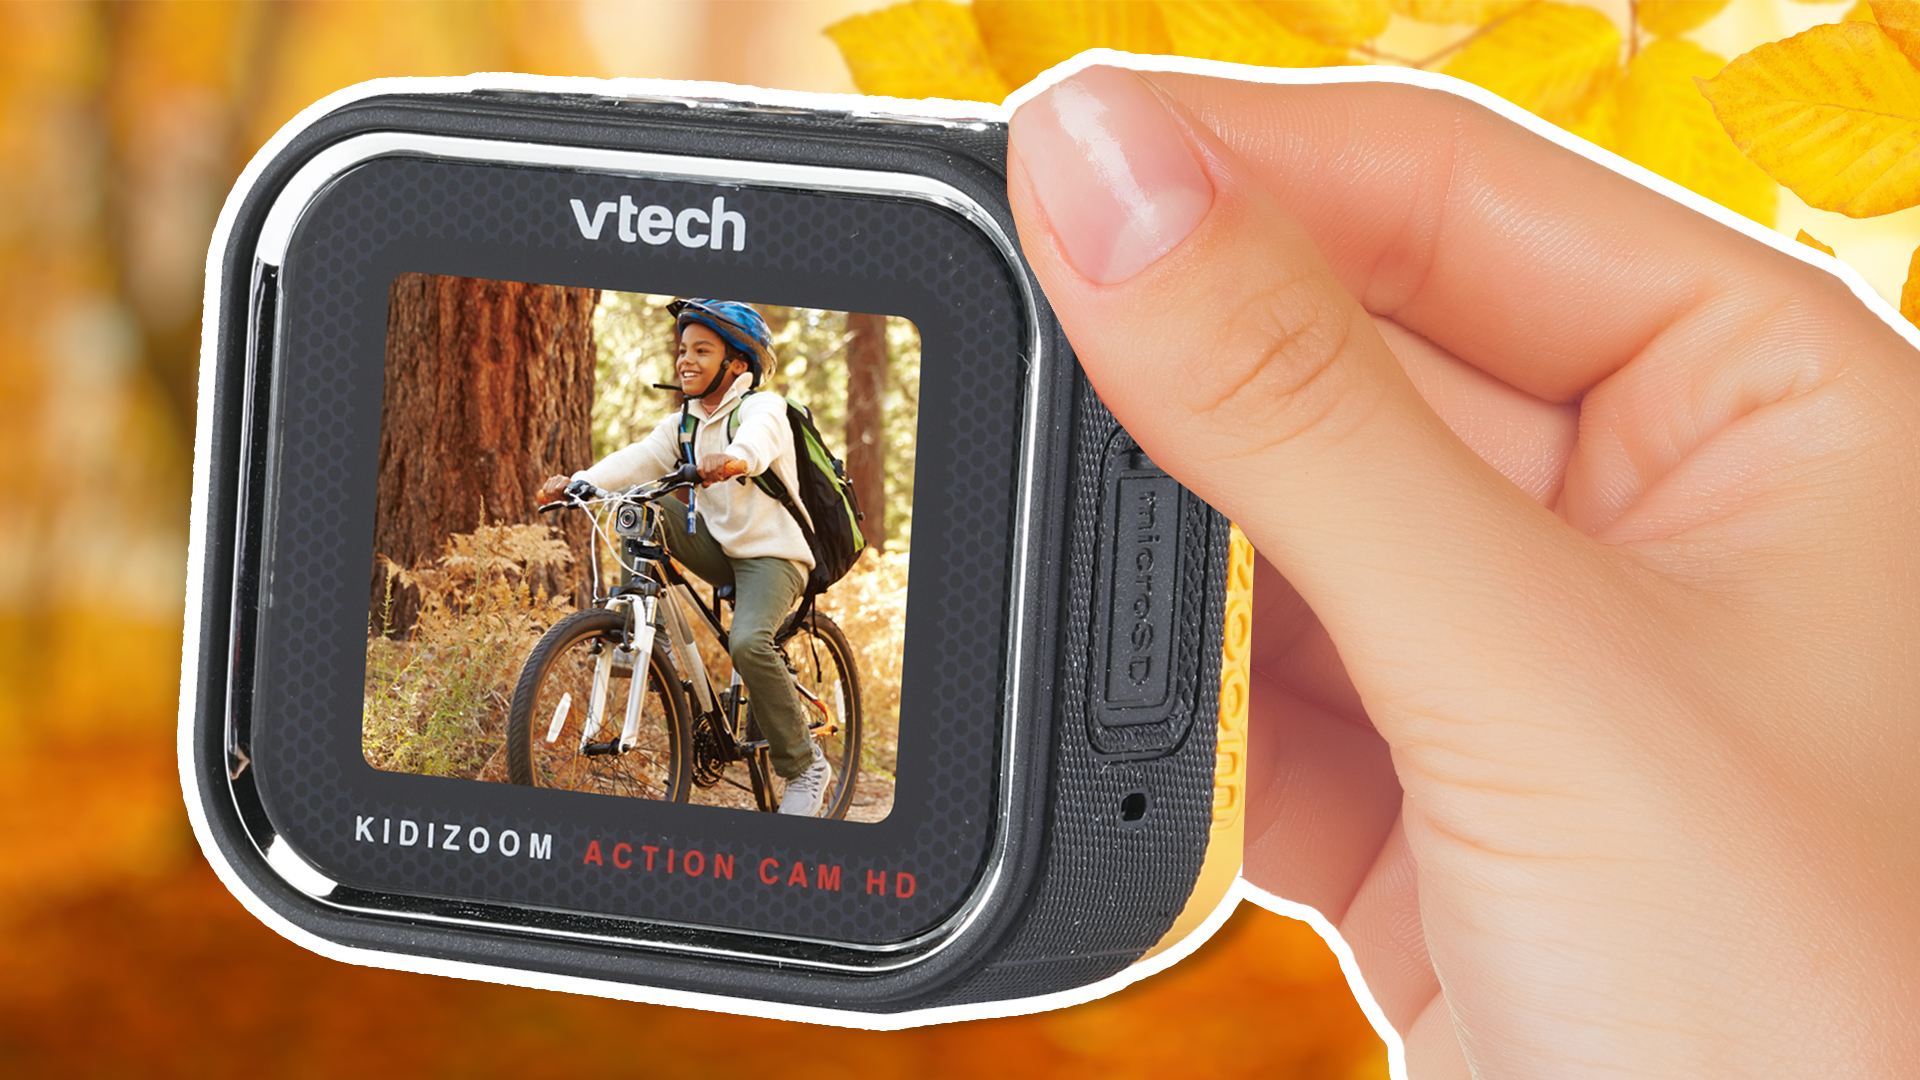 A close of the VTech action cam